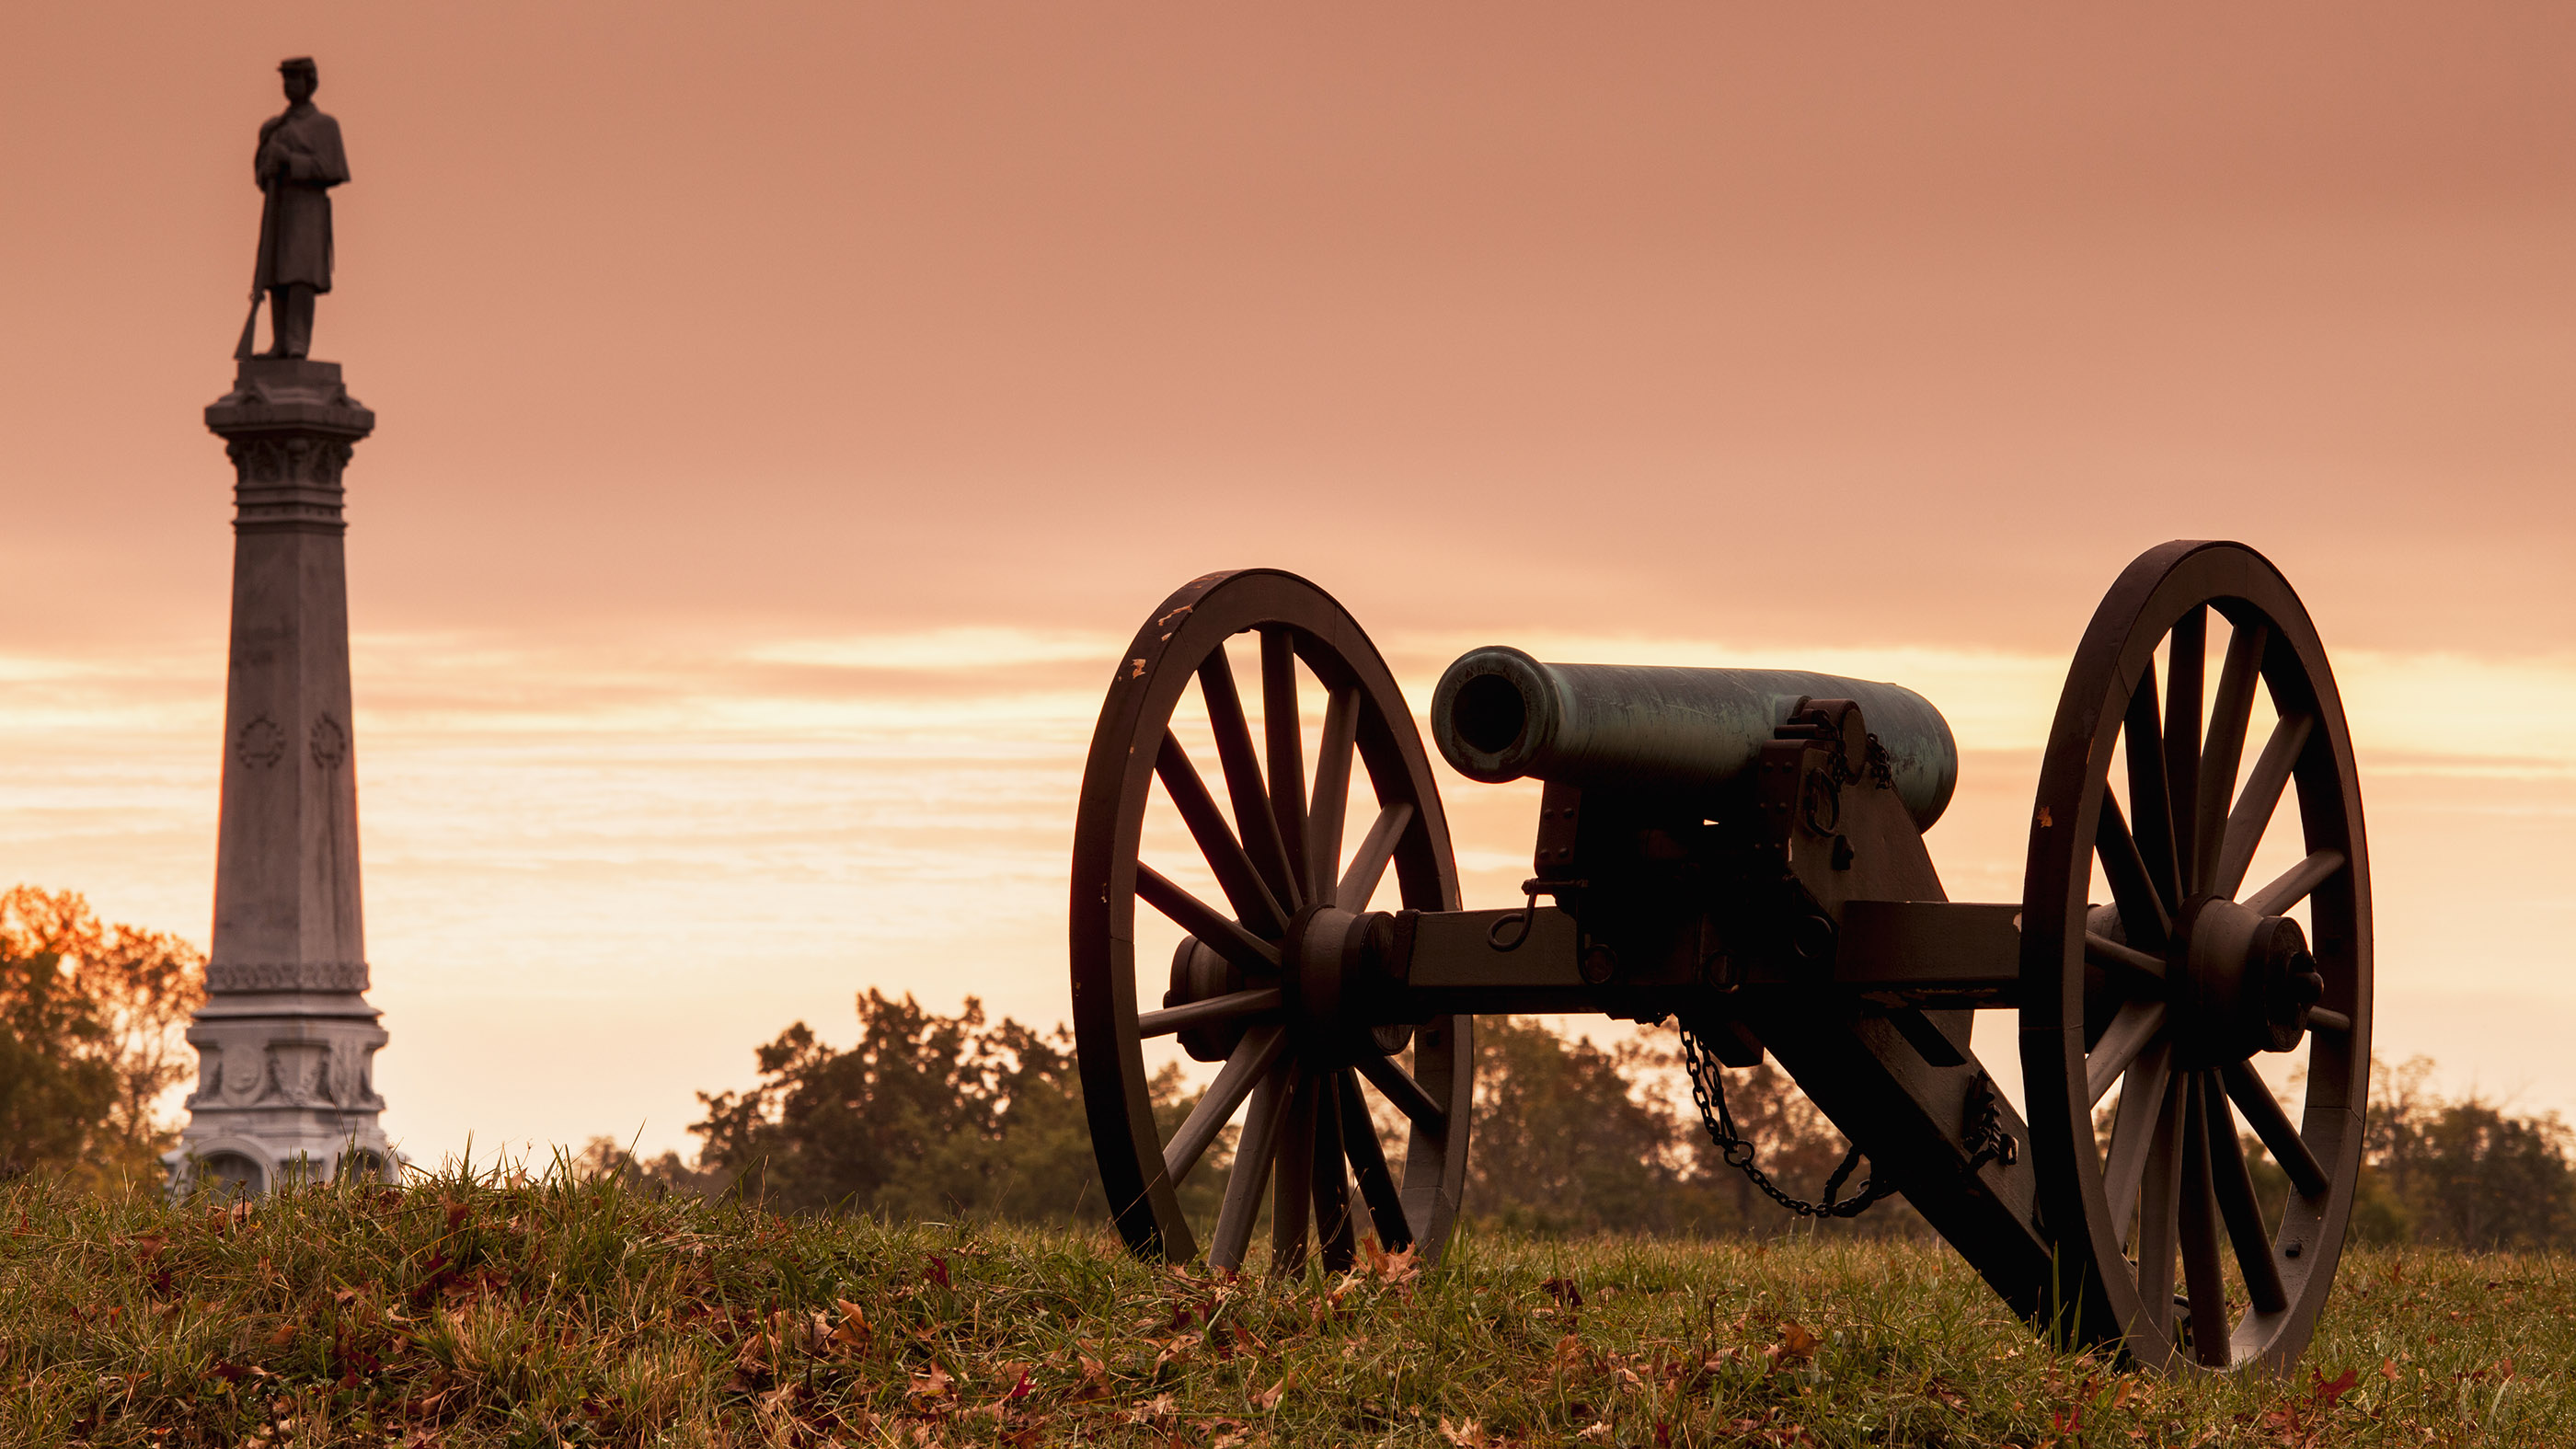 The Battle of Gettysburg, battlefield monument and Civil War cannon shown at dawn.